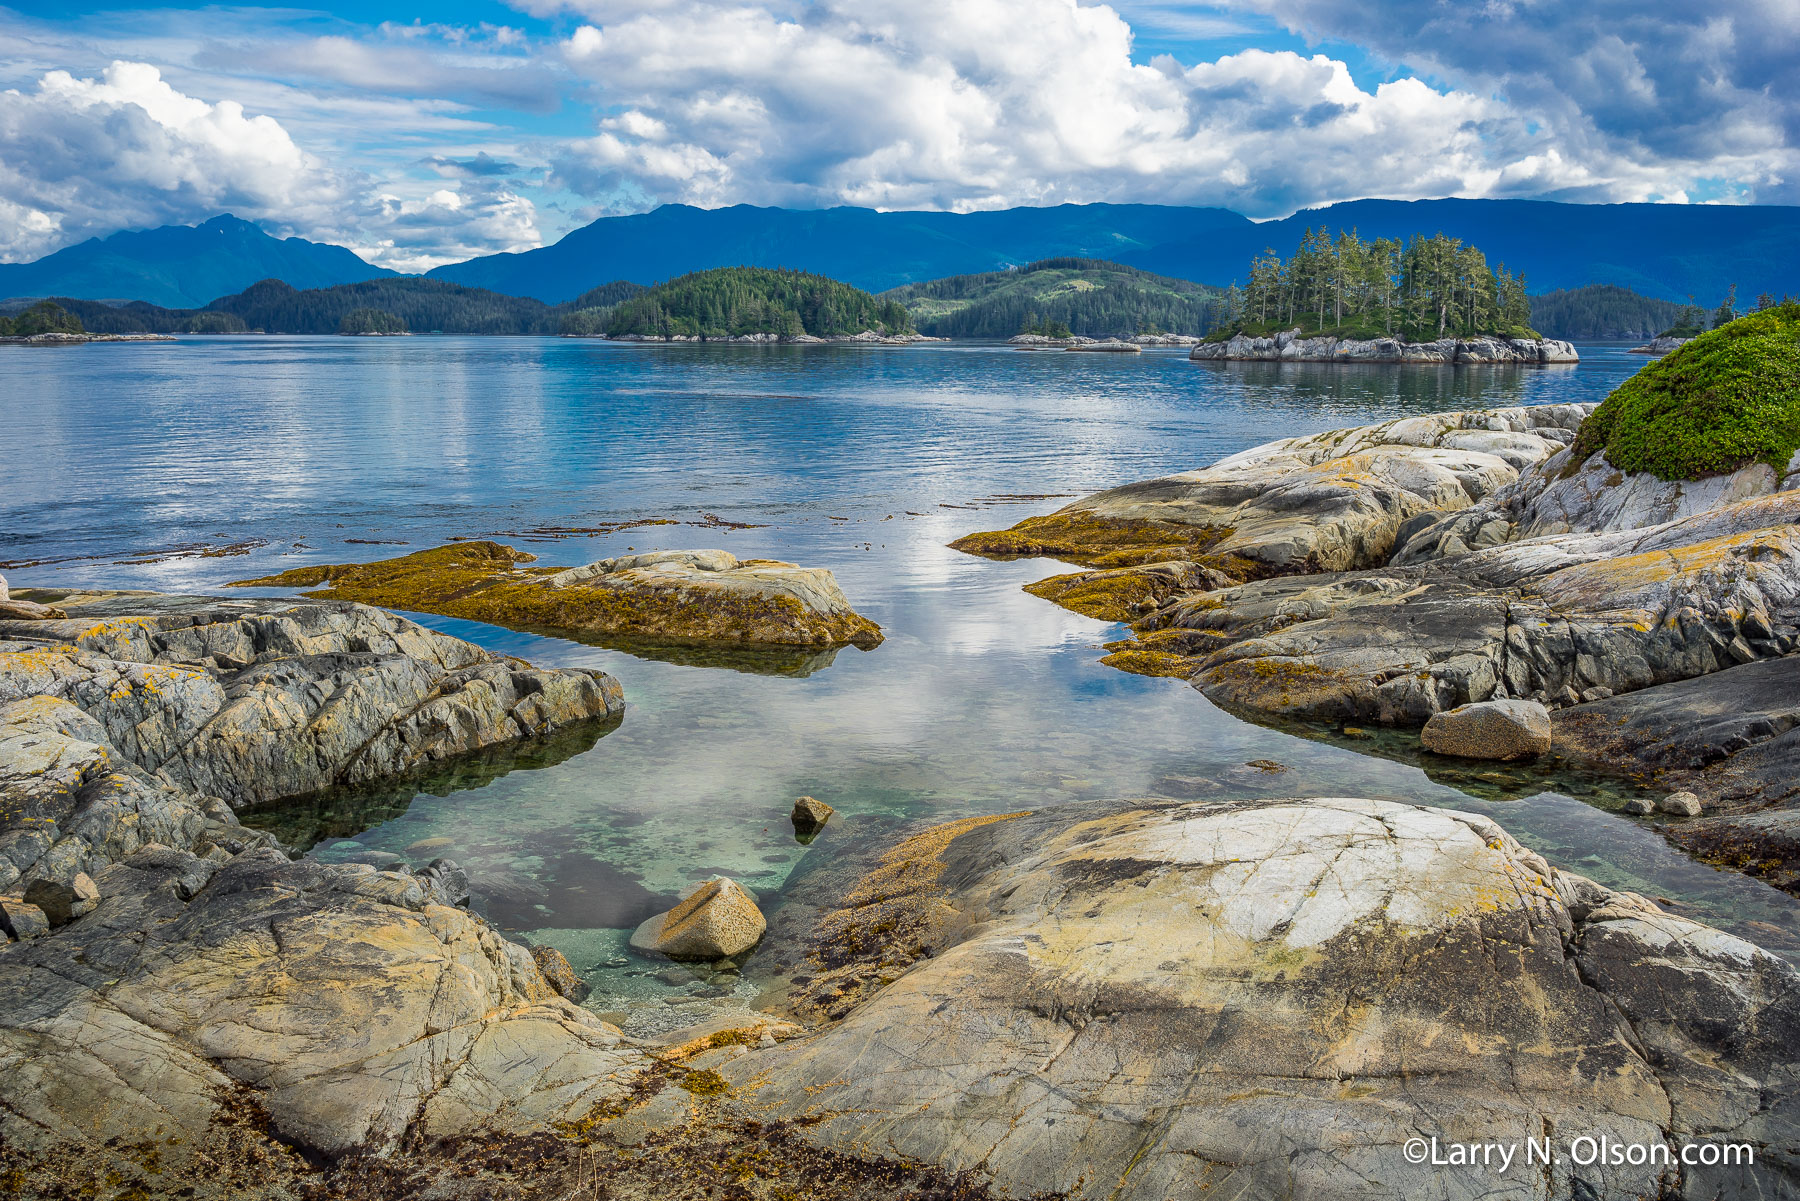 White Cliffs, Broughton Archipelago, BC | Rocky ledges on the White Cliffs are pollished smooth by ocean waves  in the Broughton Archipelago.